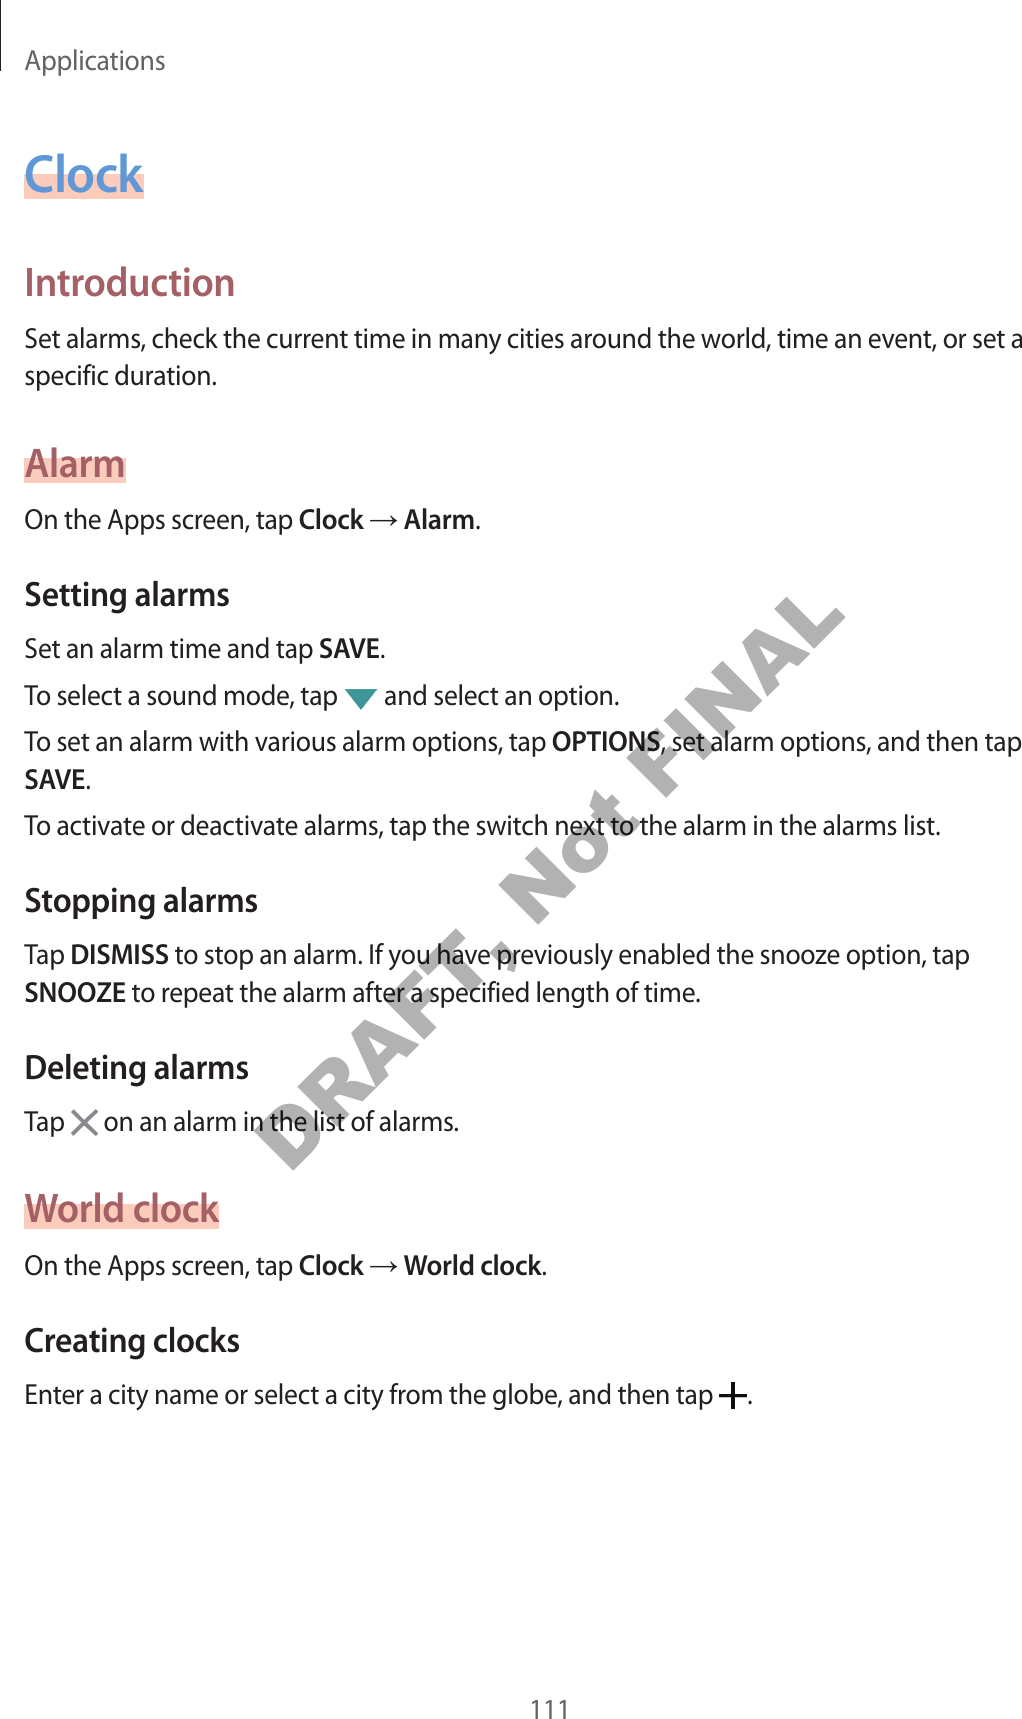 Applications111ClockIntroductionSet alarms, check the current time in many cities around the world, time an event, or set a specific duration.AlarmOn the Apps screen, tap Clock → Alarm.Setting alarmsSet an alarm time and tap SAVE.To select a sound mode, tap   and select an option.To set an alarm with various alarm options, tap OPTIONS, set alarm options, and then tap SAVE.To activate or deactivate alarms, tap the switch next to the alarm in the alarms list.Stopping alarmsTap DISMISS to stop an alarm. If you have previously enabled the snooze option, tap SNOOZE to repeat the alarm after a specified length of time.Deleting alarmsTap   on an alarm in the list of alarms.World clockOn the Apps screen, tap Clock → World clock.Creating clocksEnter a city name or select a city from the globe, and then tap  .DRAFT, Not FINAL